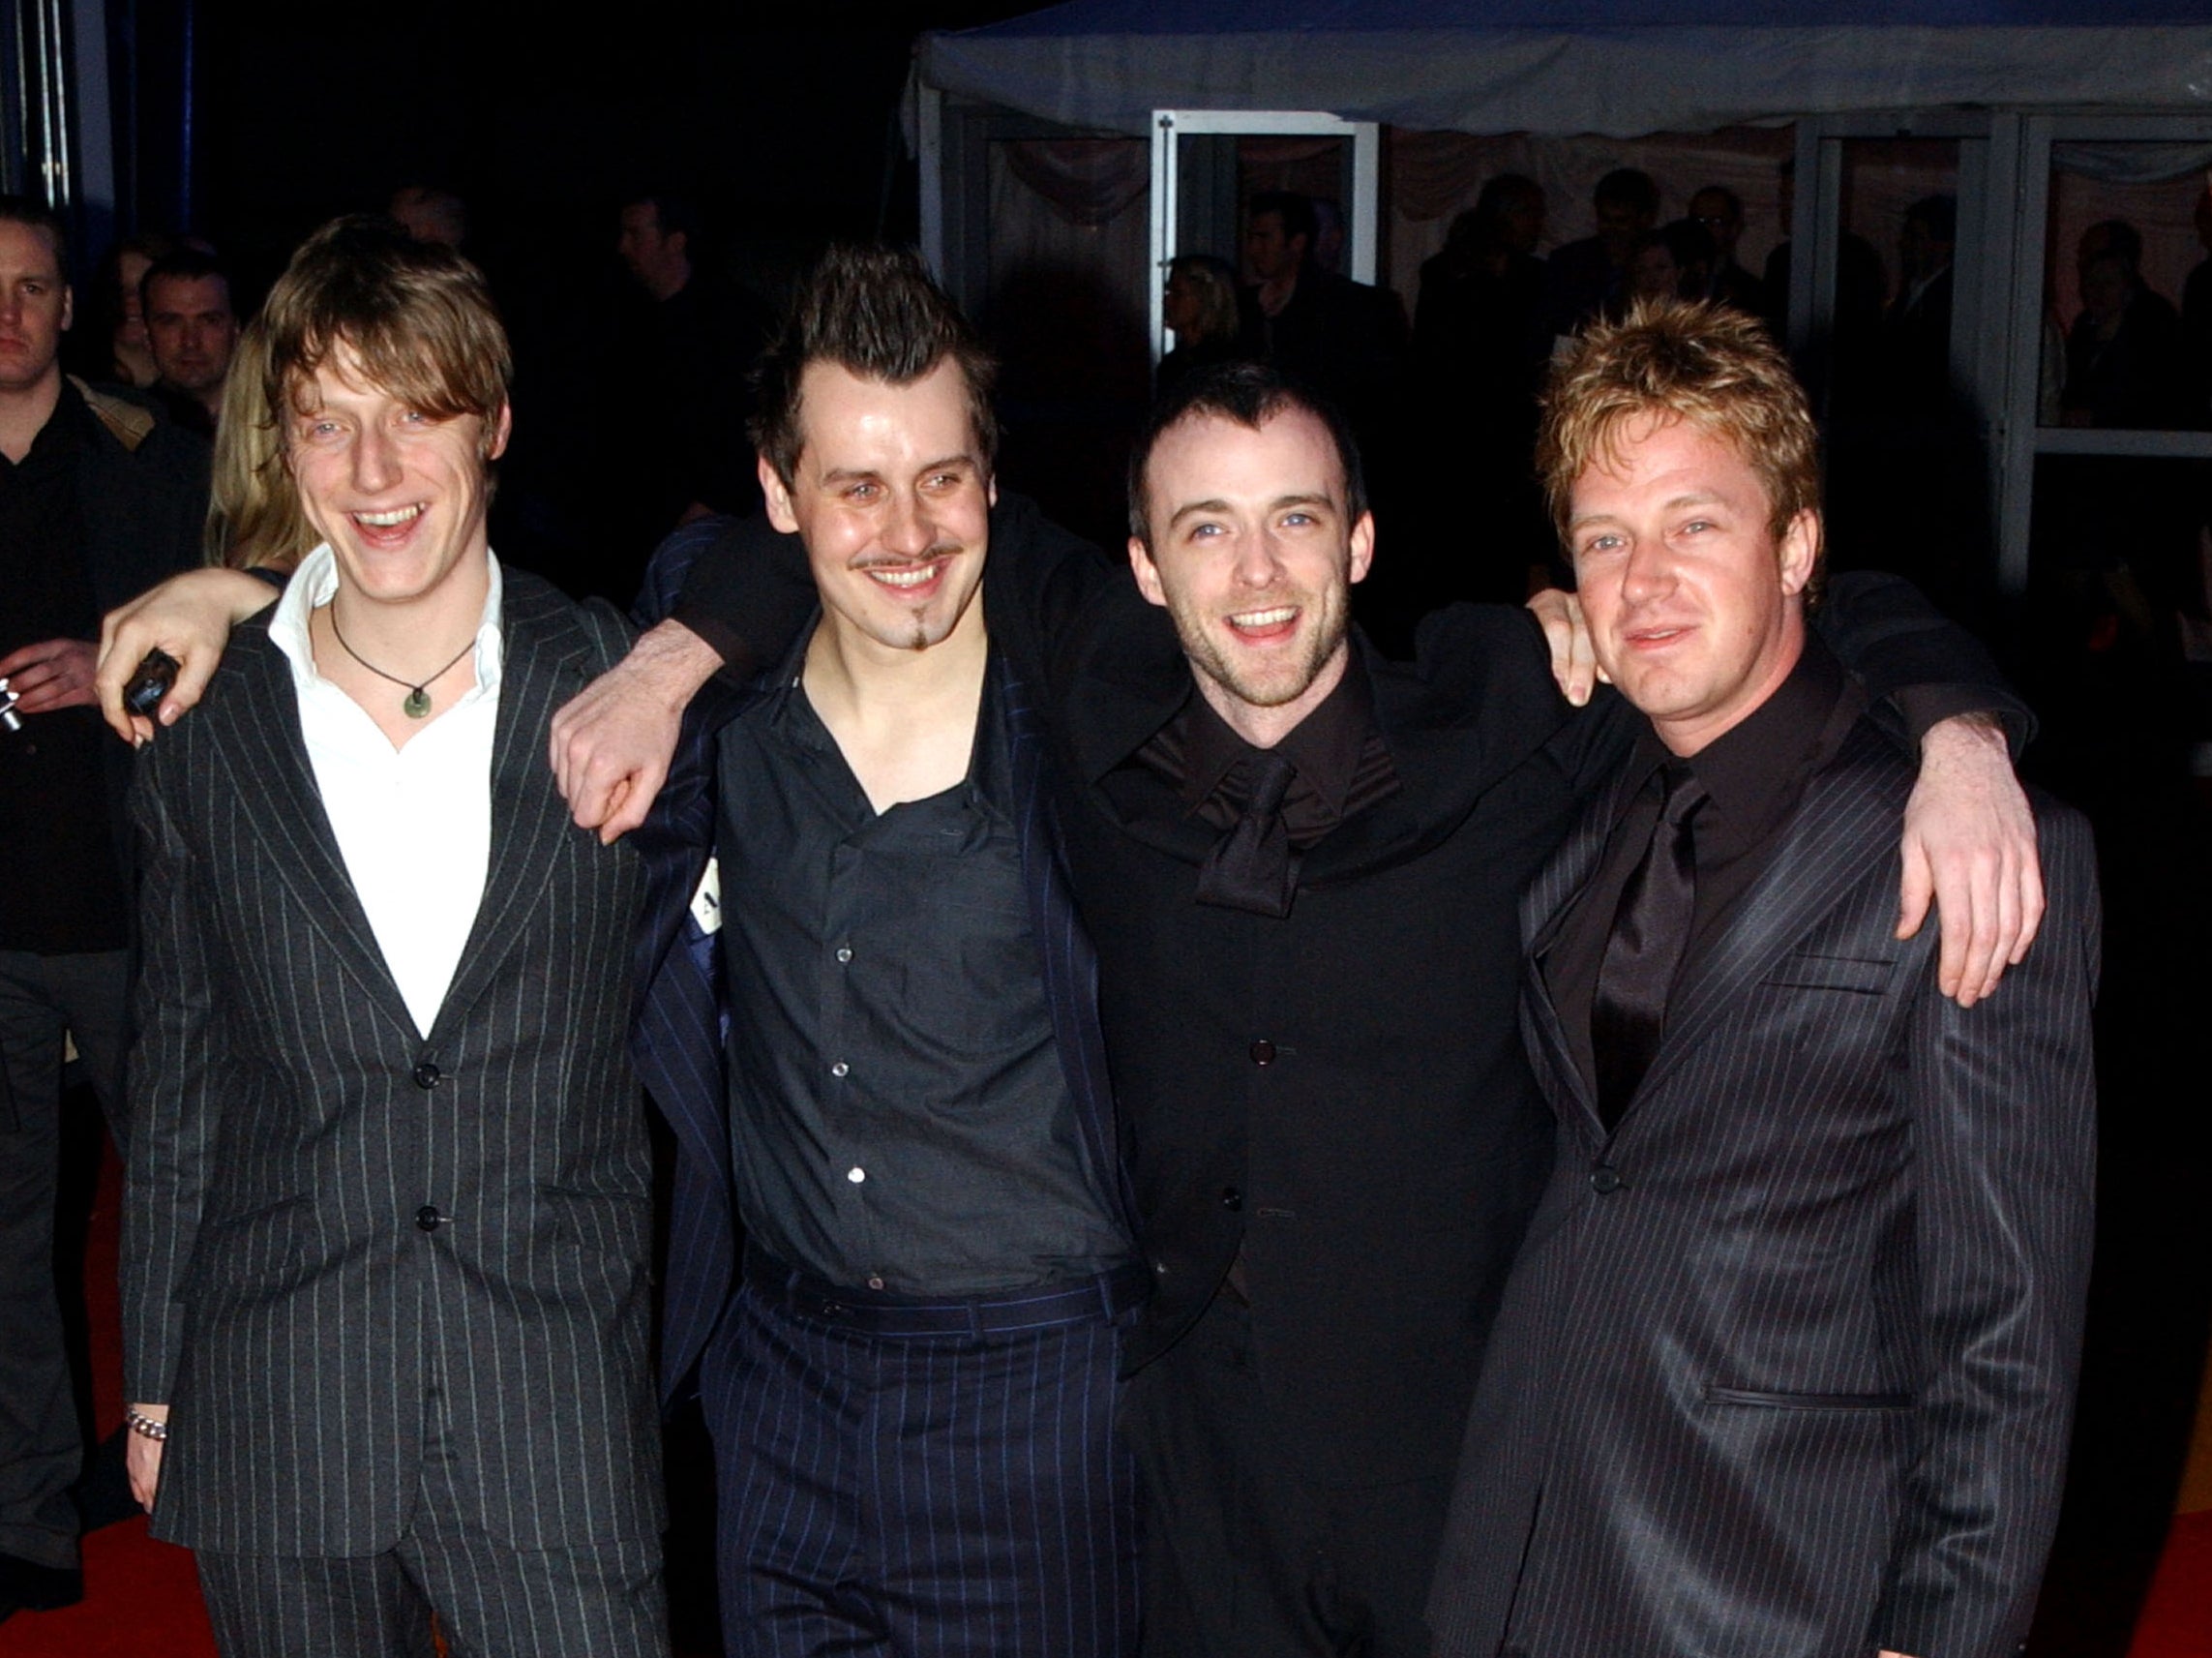 Travis at the Brit Awards in 2007